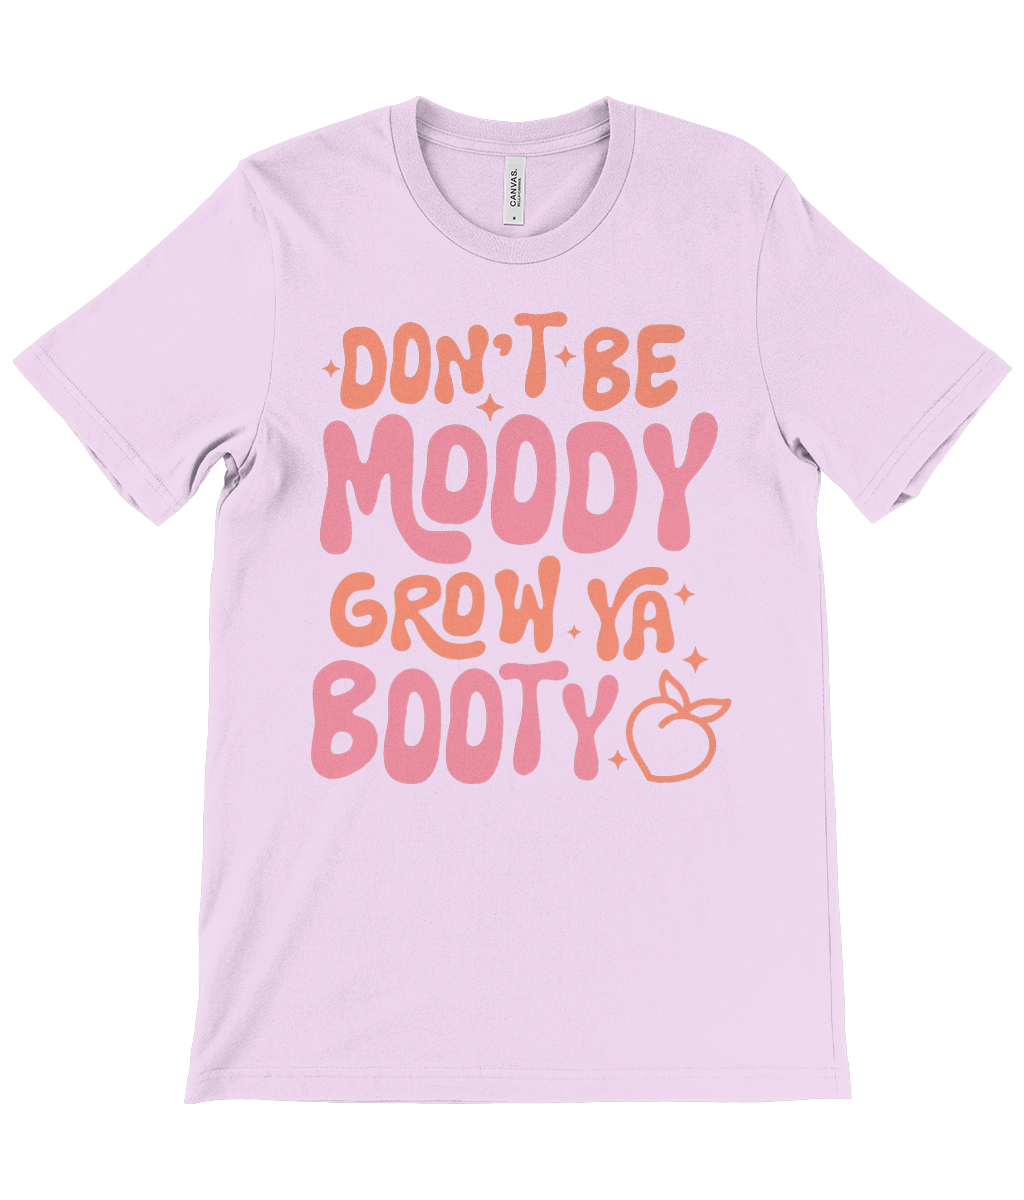 "Don't Be Moody, Grow Your Booty" Funny Graphic Tee